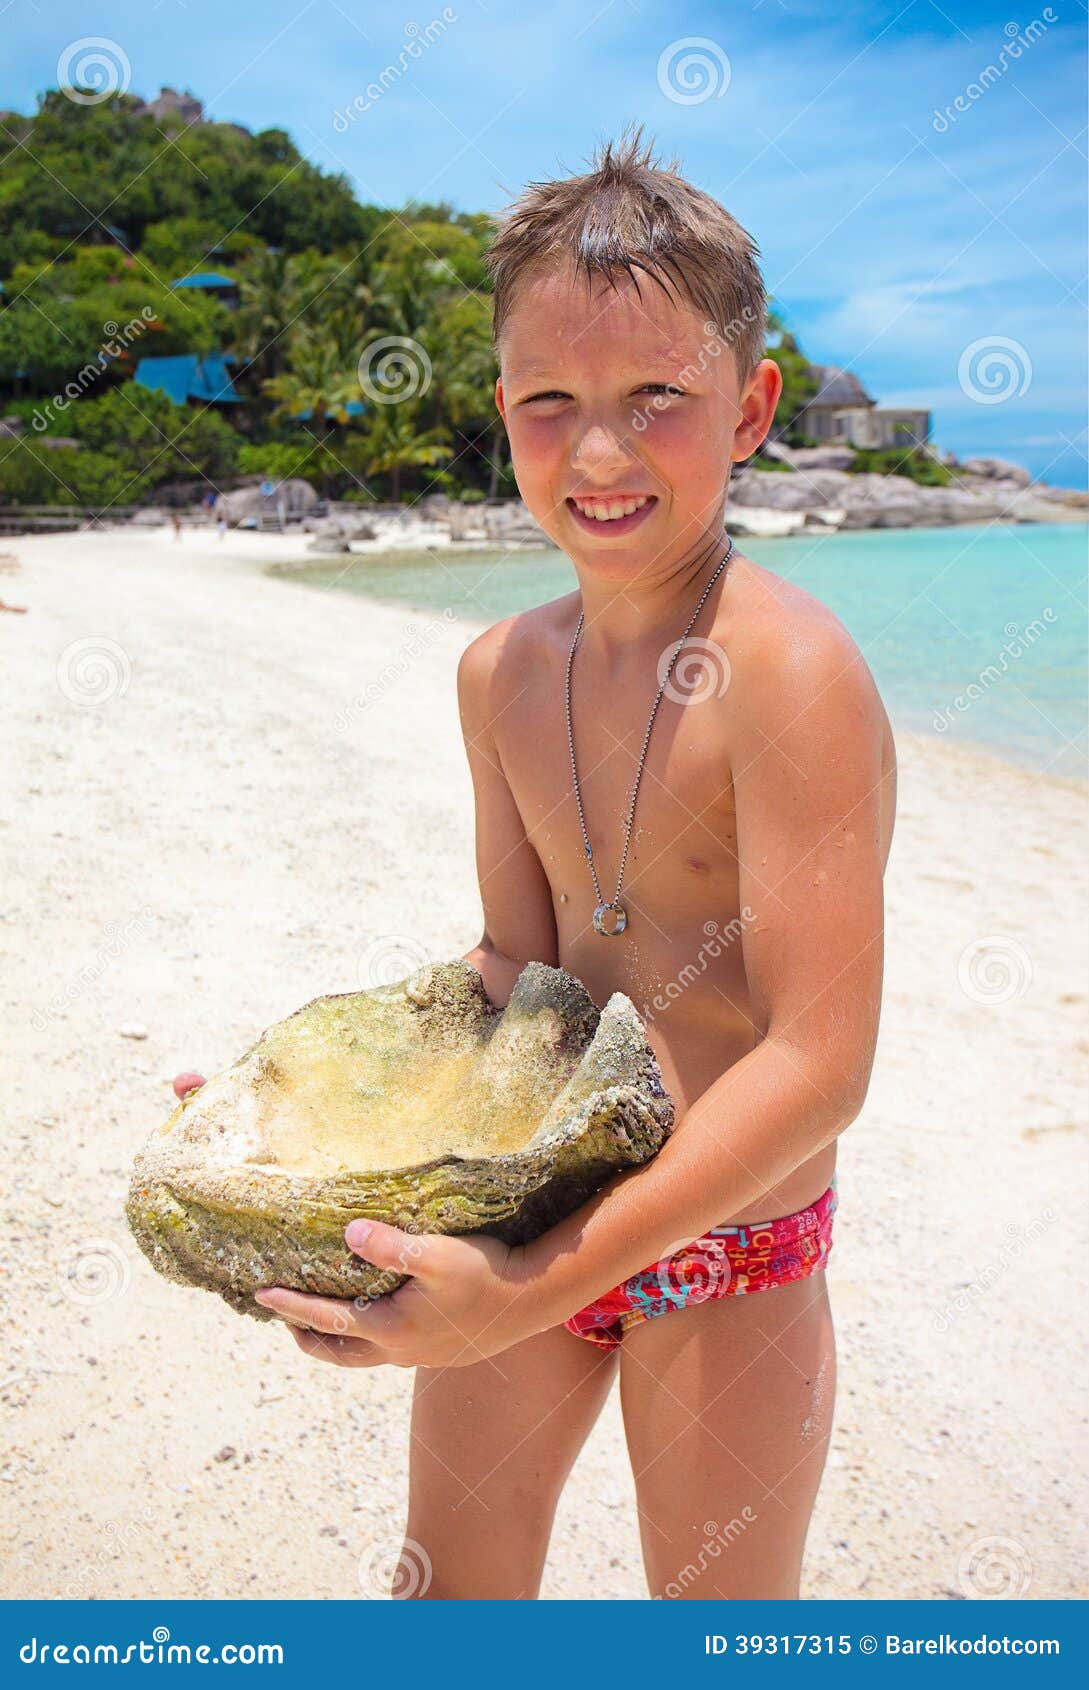 Big Seashell Held by a Young Boy on the Beach